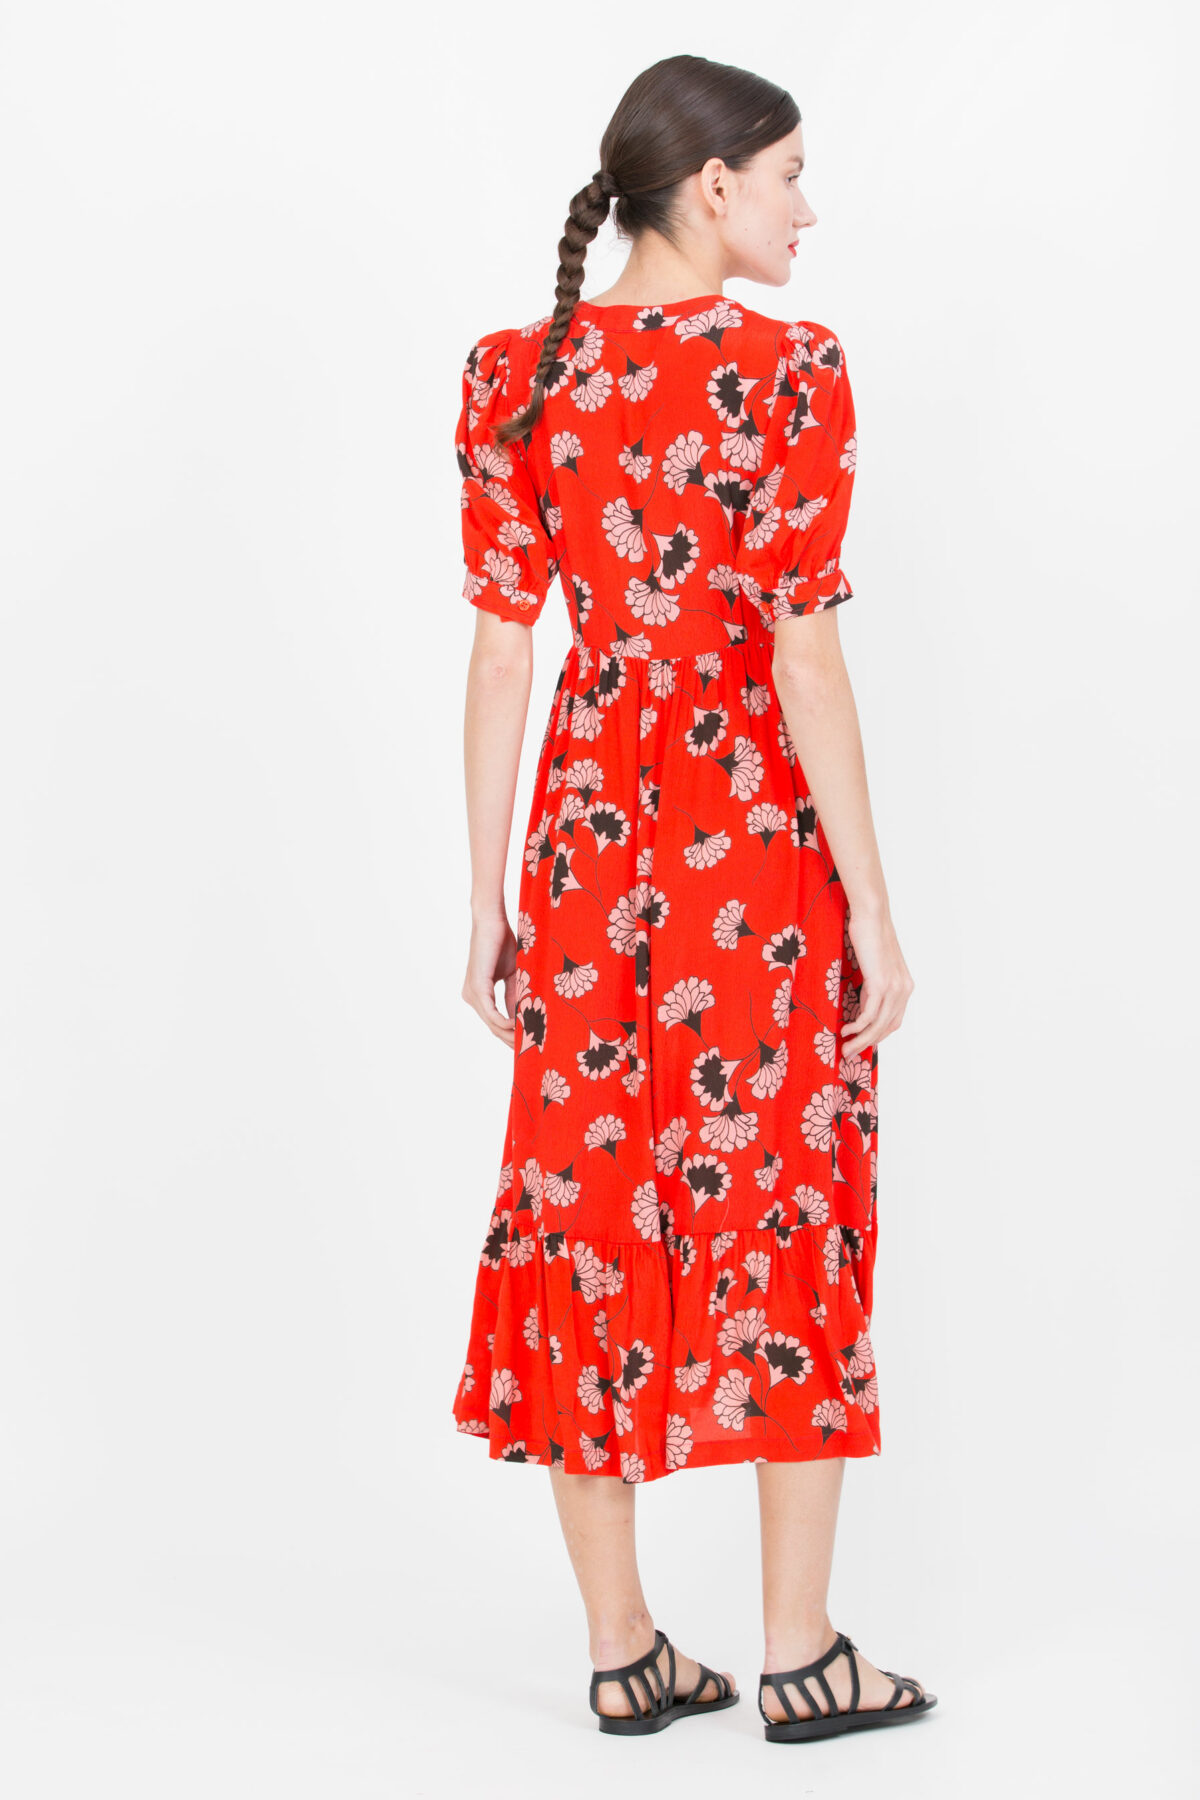 rebecca-printed-floral-red-dress-lapetitefrancaise-matchboxathens